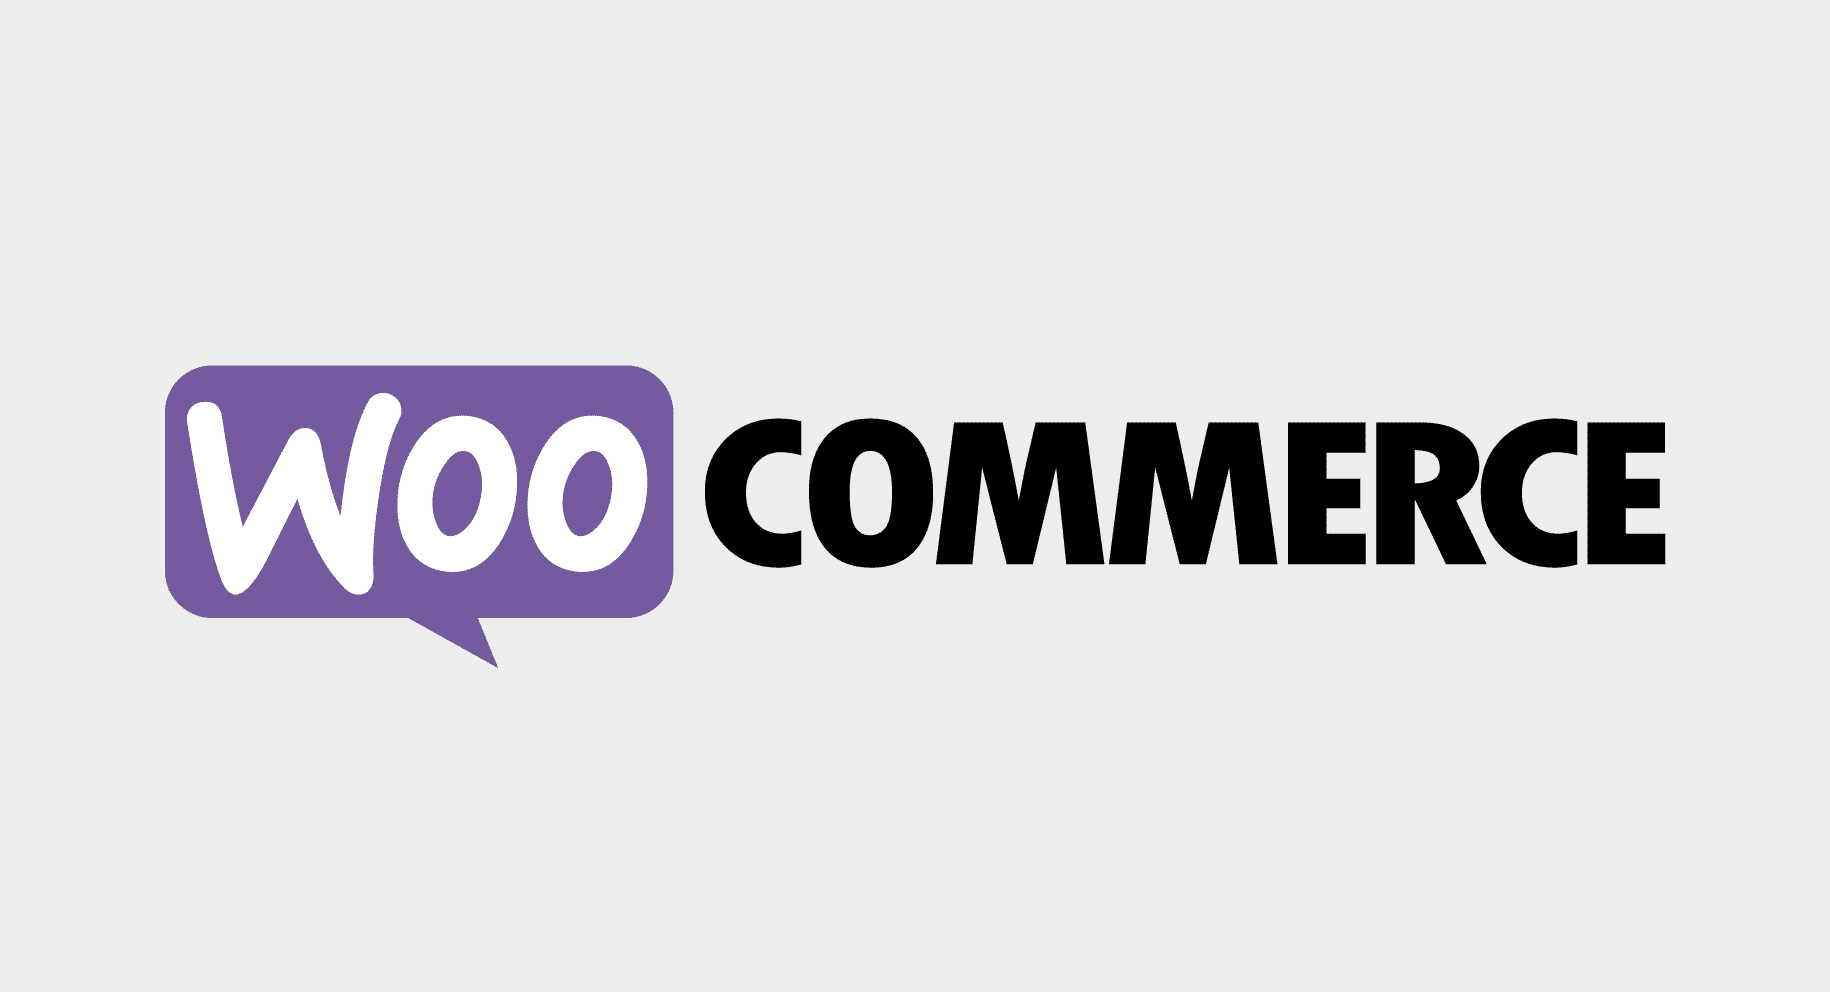 woocommerce-store-api-now-stable-provides-better-support-for-custom-frontends WooCommerce Store API 現在穩定，為自定義前端提供更好的支持